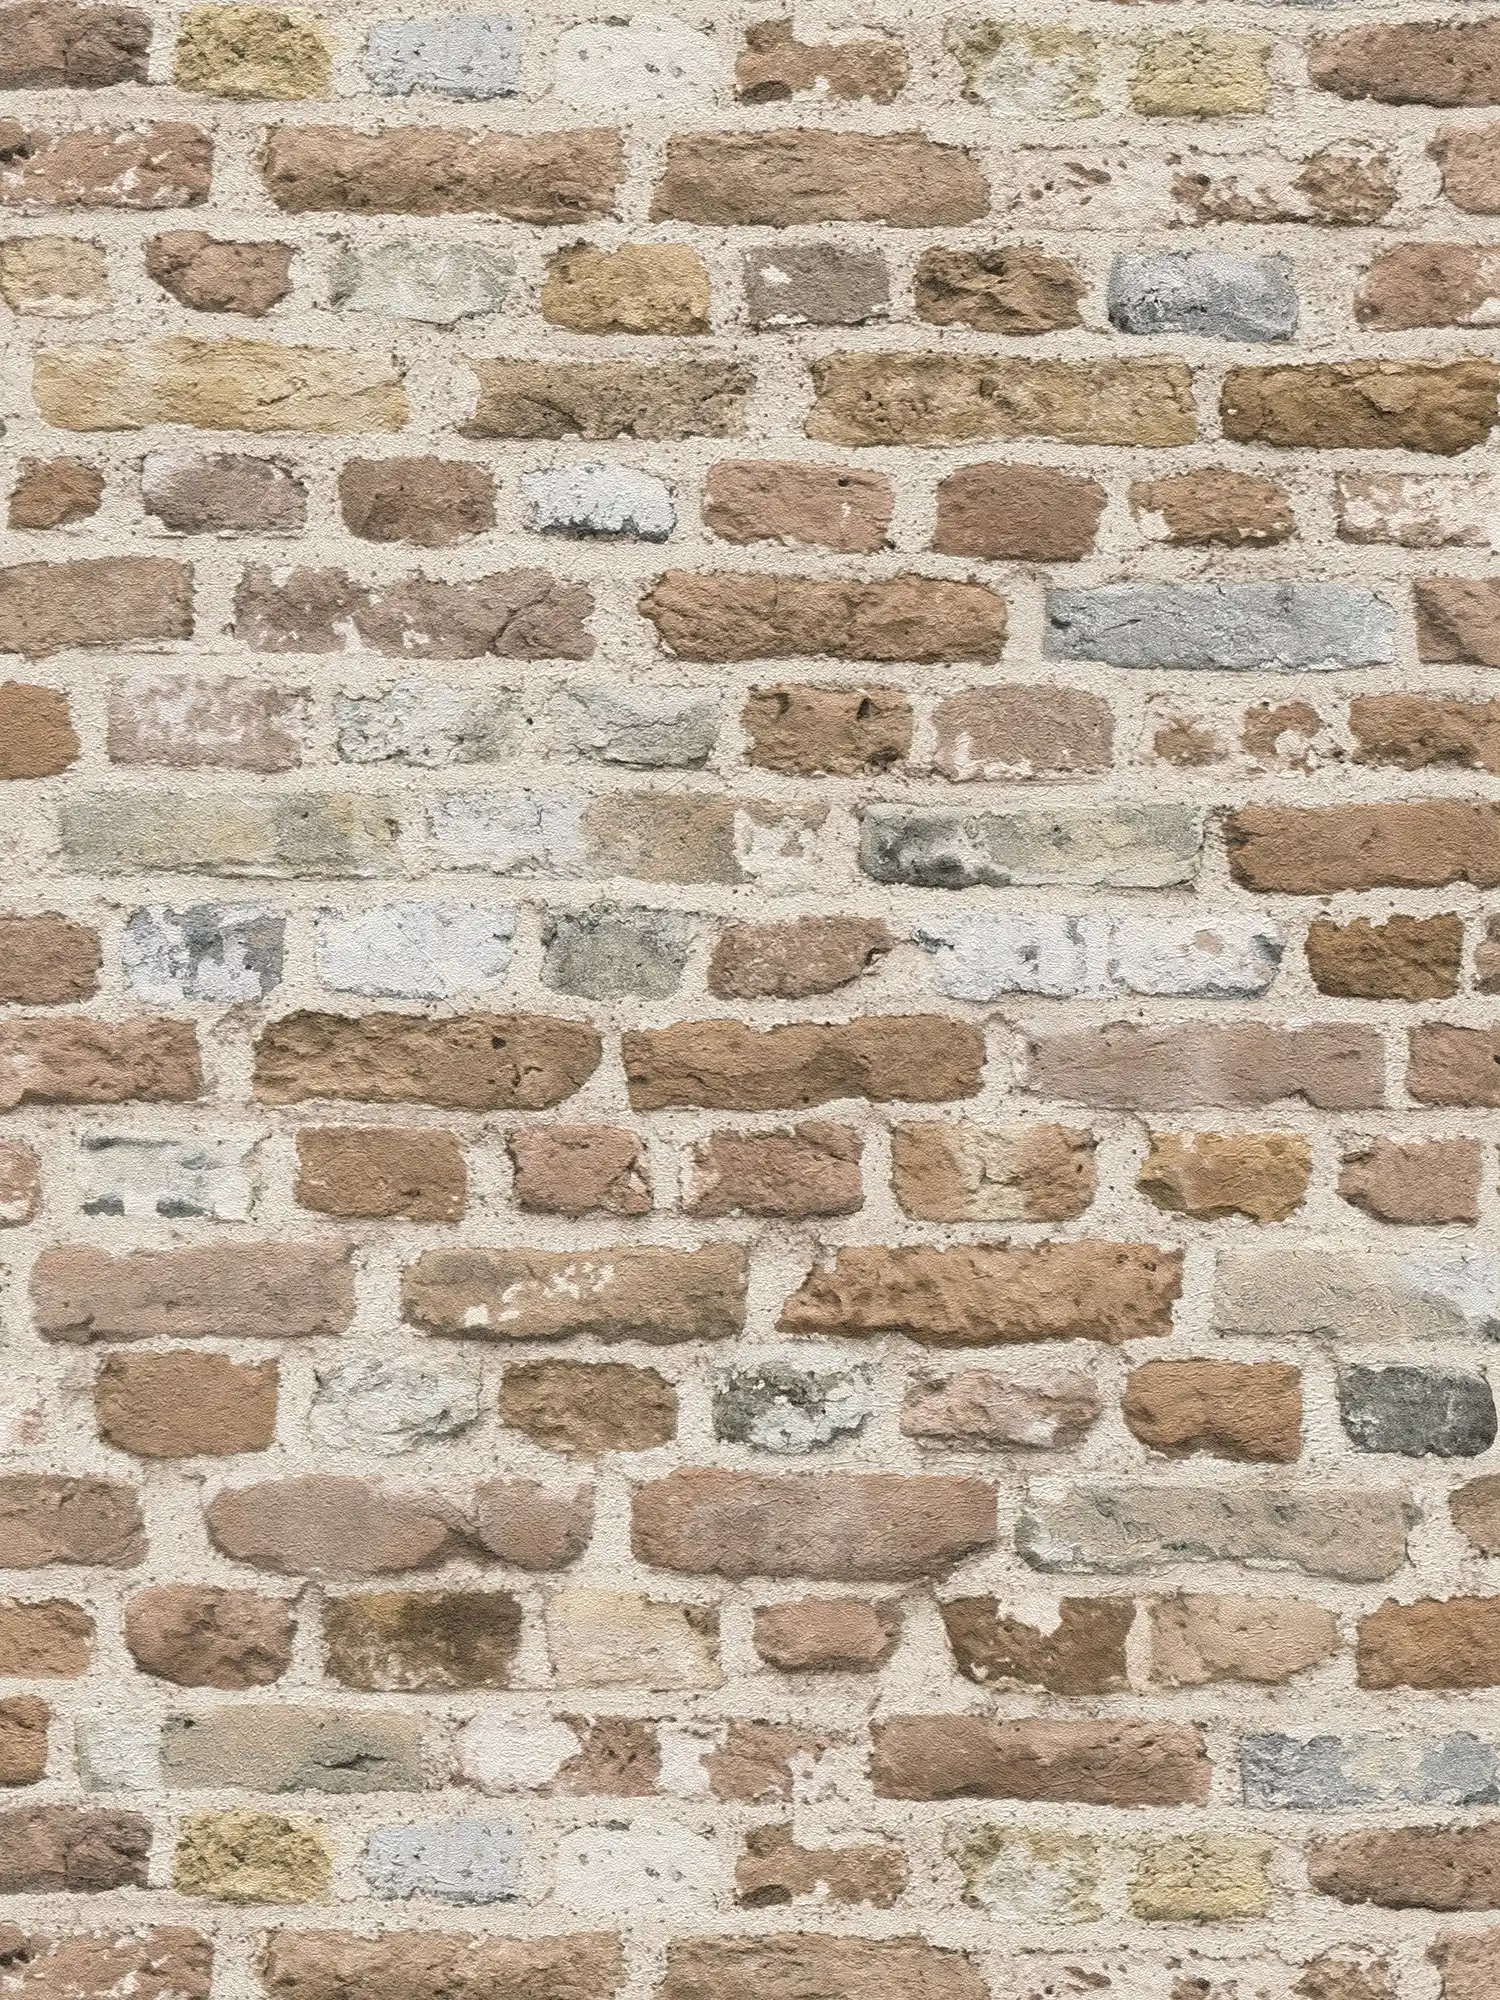         Brown stone wallpaper with brick wall look - brown, grey
    